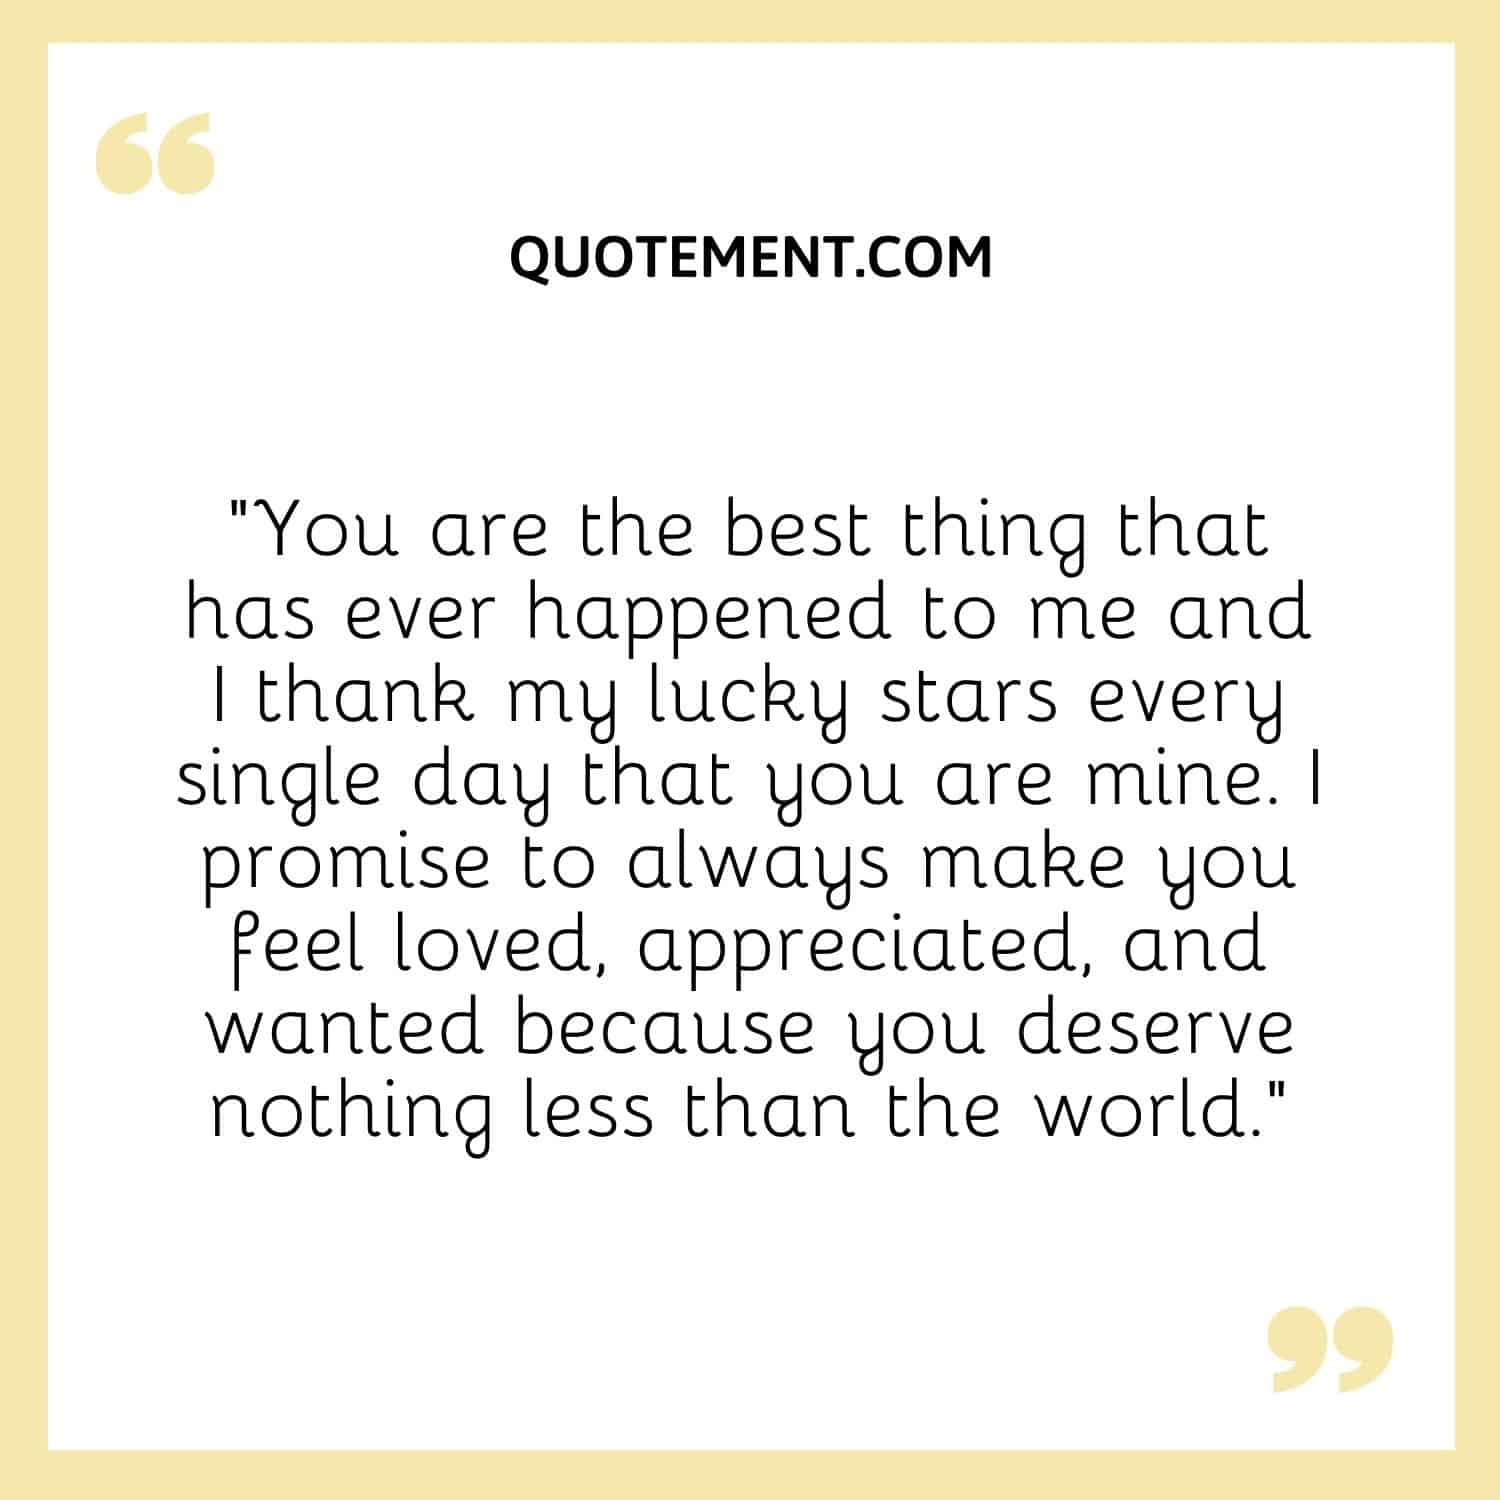 “You are the best thing that has ever happened to me and I thank my lucky stars every single day that you are mine.